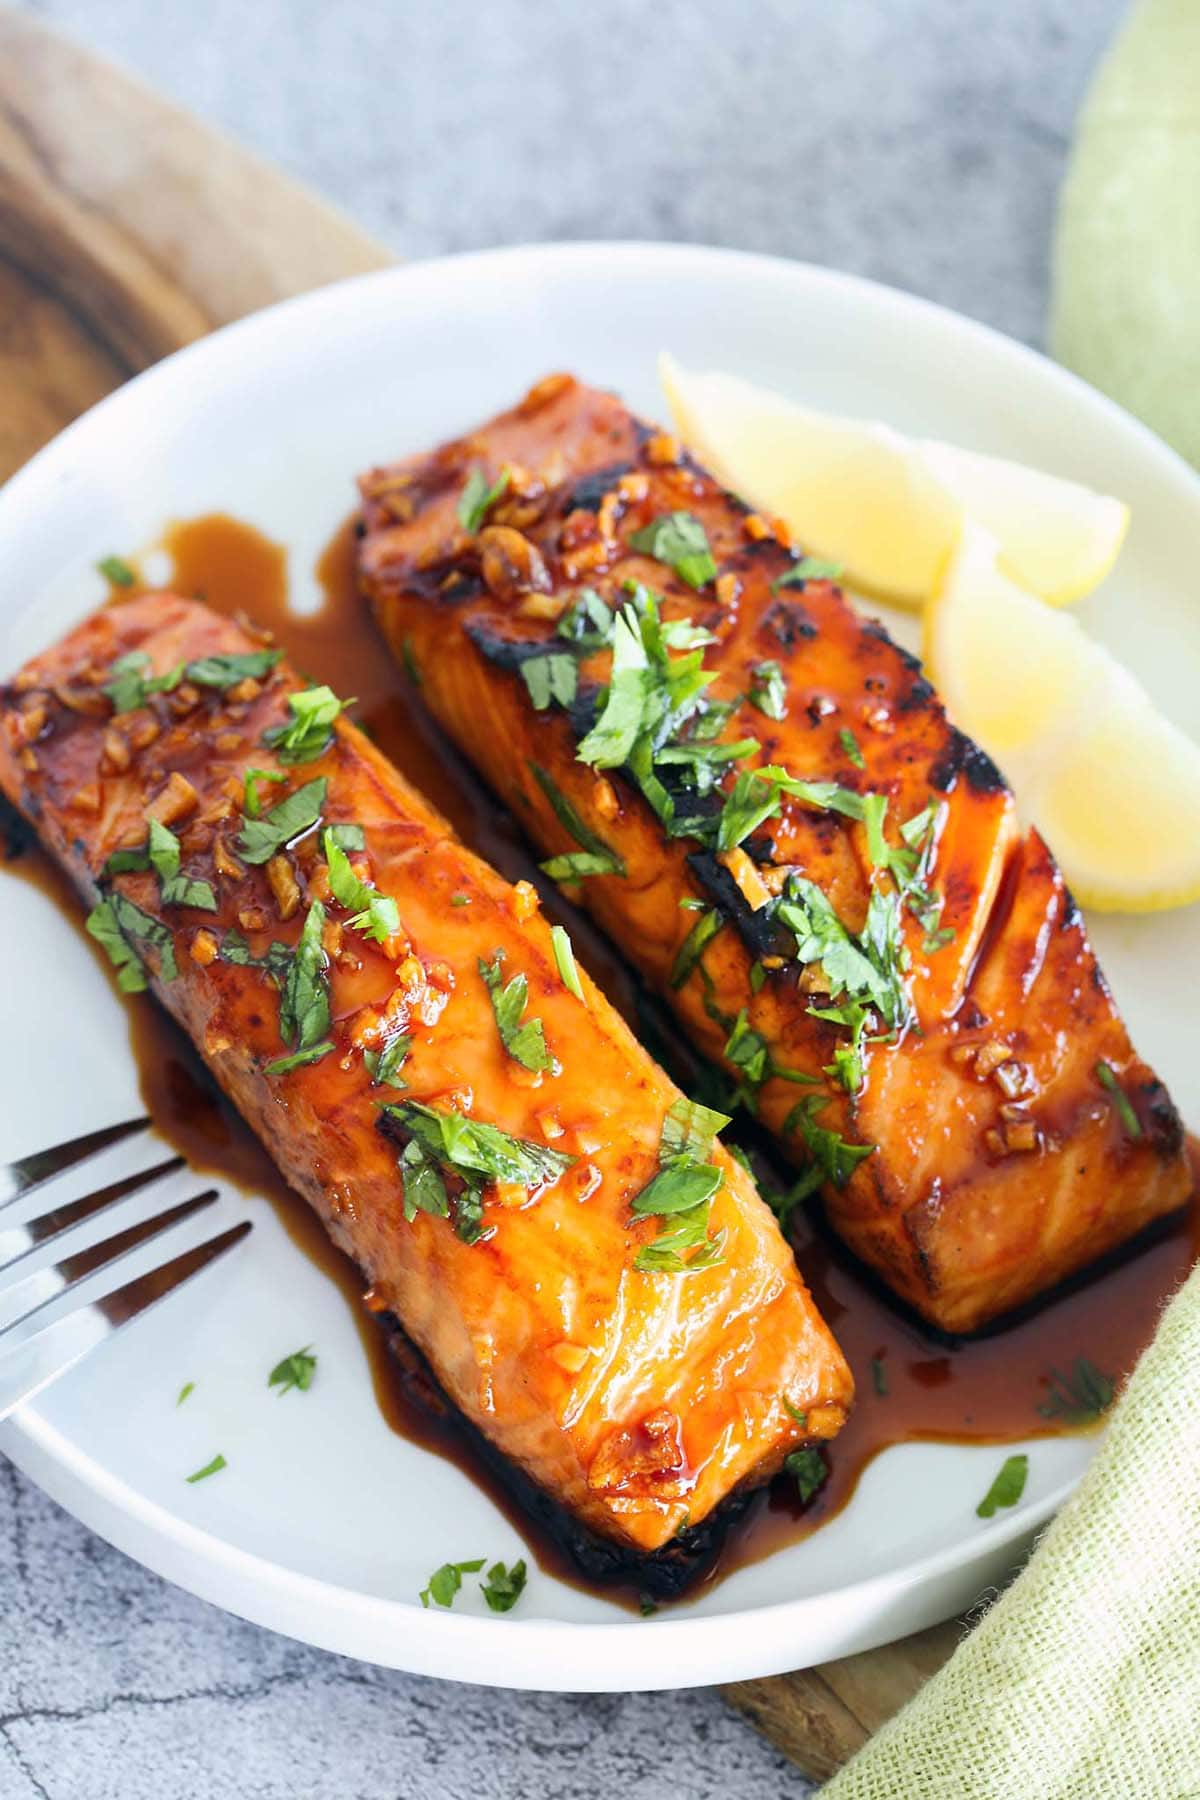 A piece of salmon glazed with honey sriracha served on a plate with lemon wedges on the side.